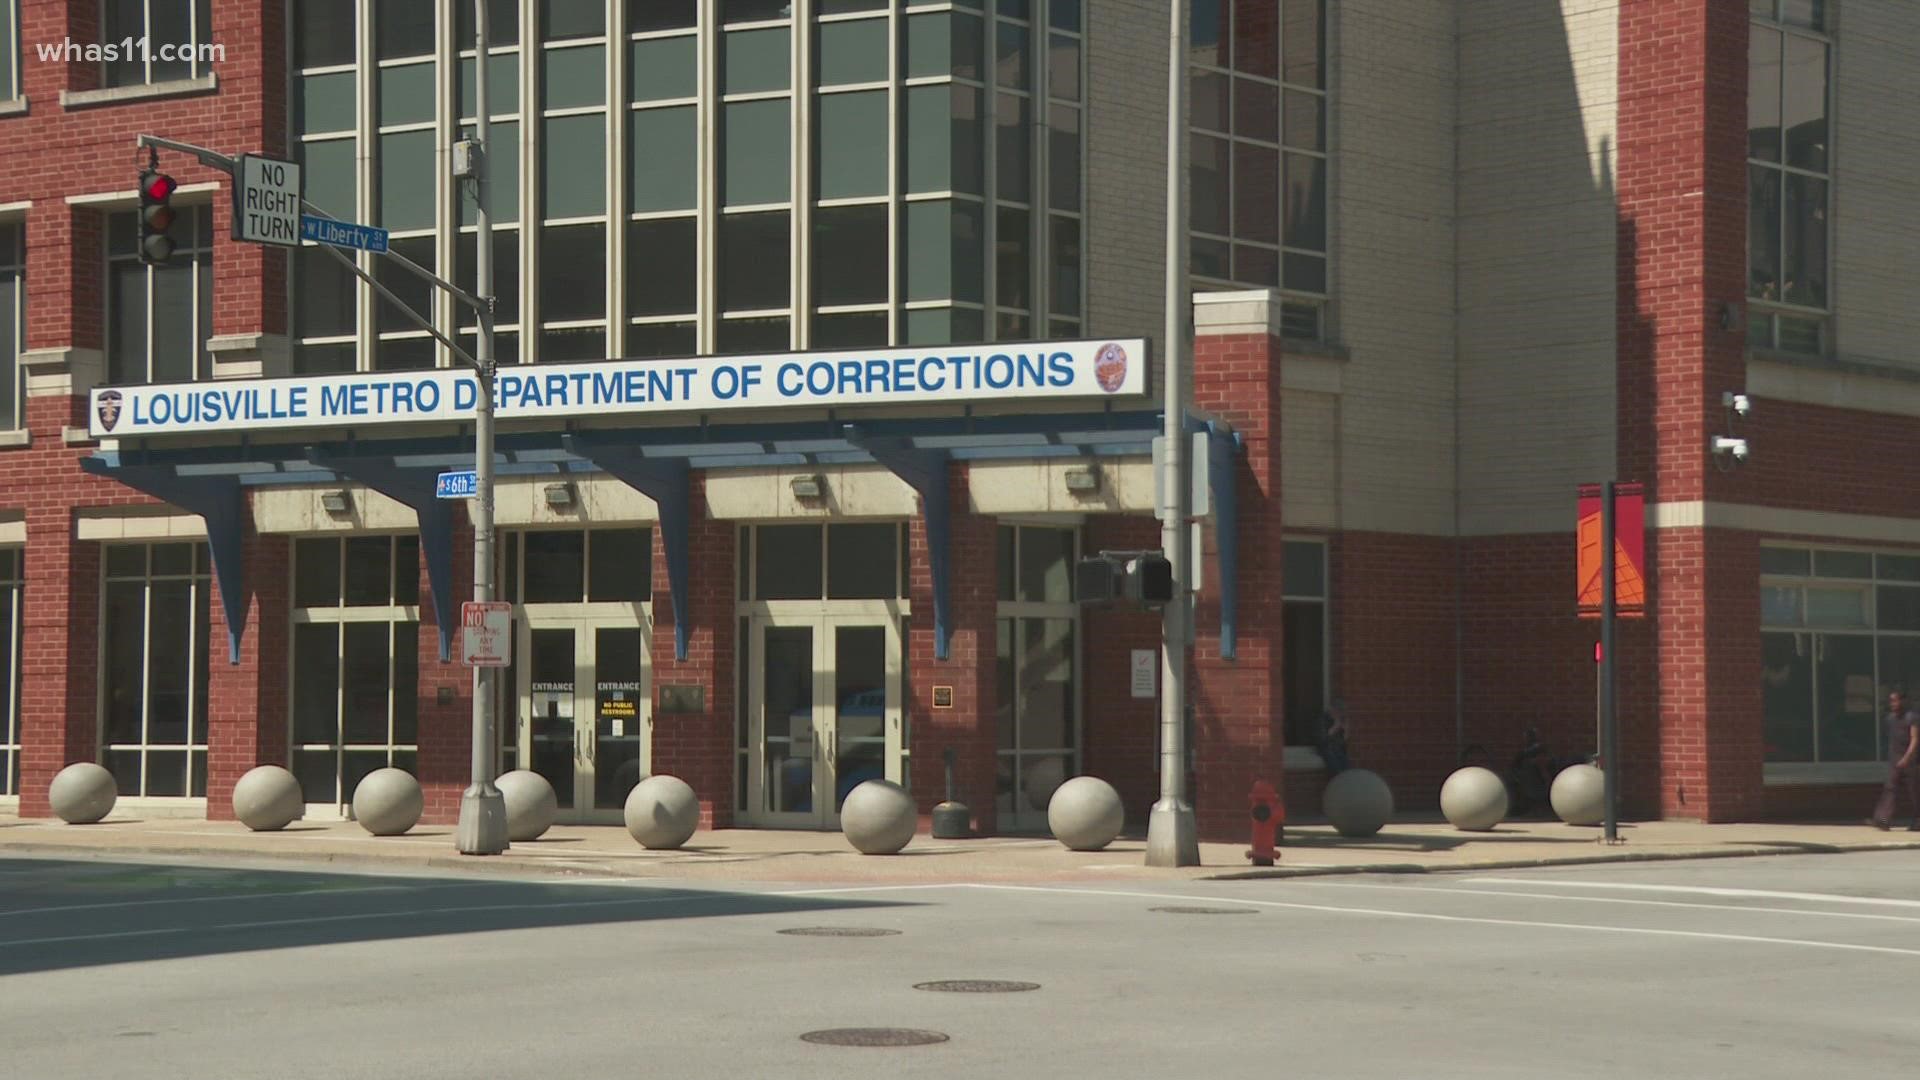 After almost a dozen deaths at Louisville Metro Corrections since last November, a new report is criticizing the jail.